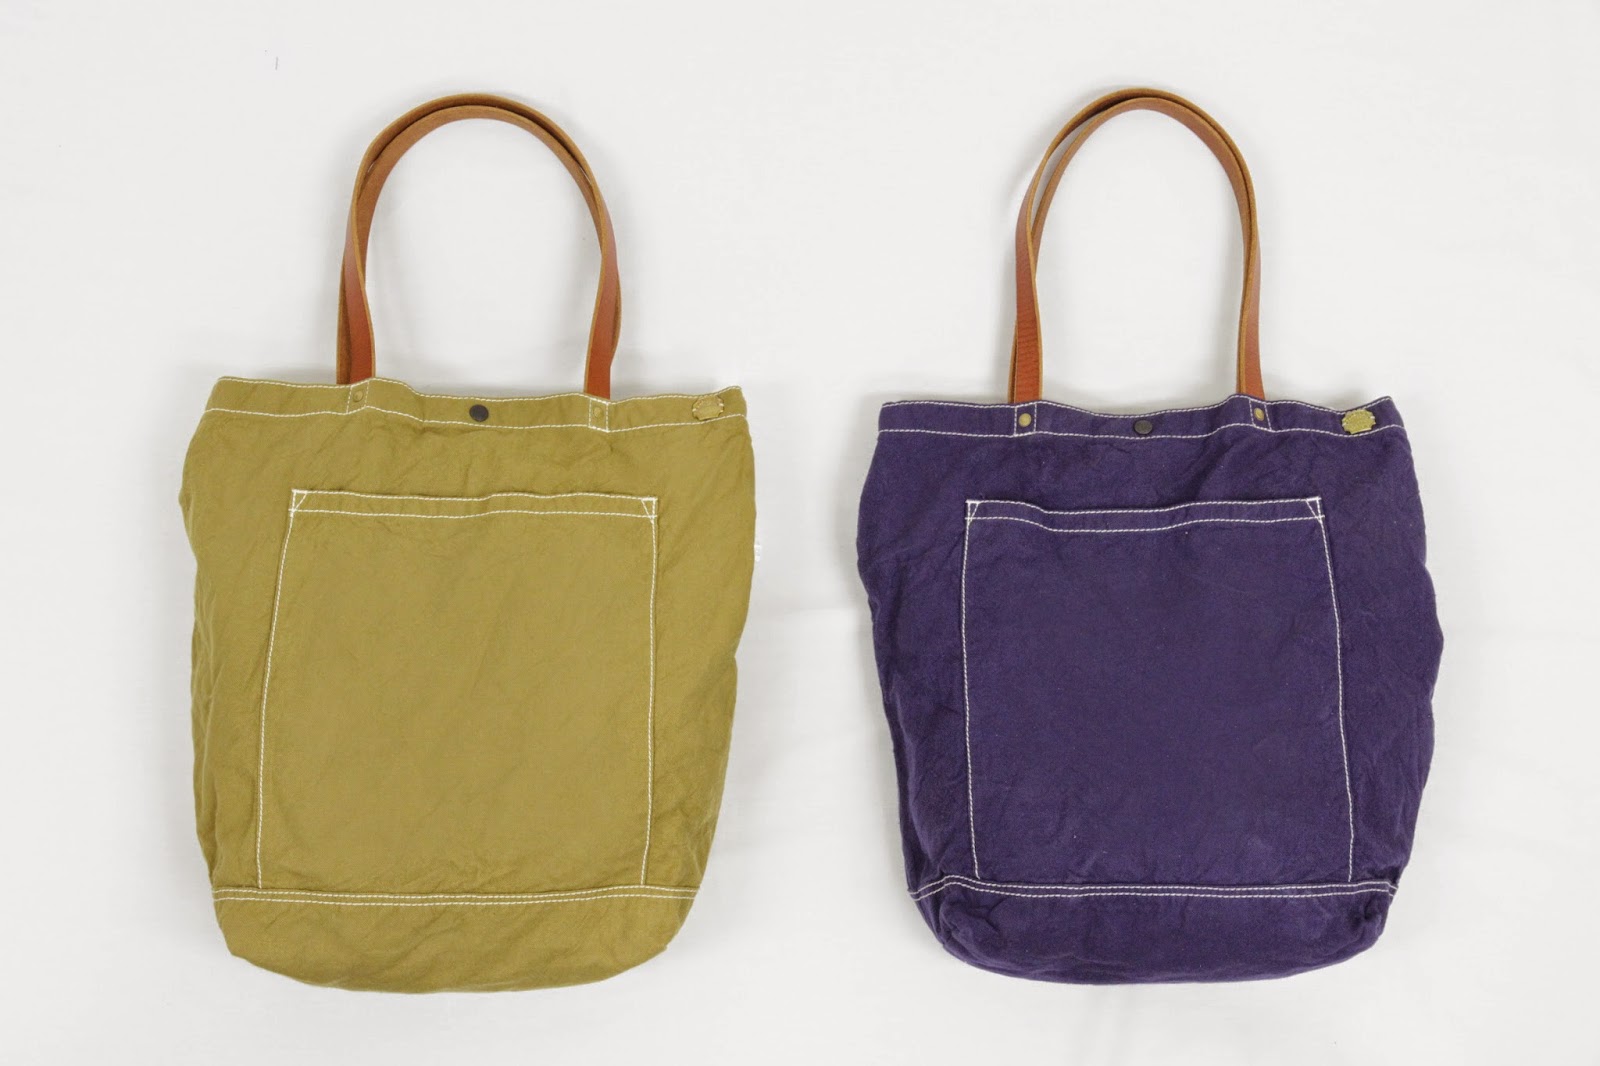 NEW PRODUCTS: 14SS SL015 bag of good size